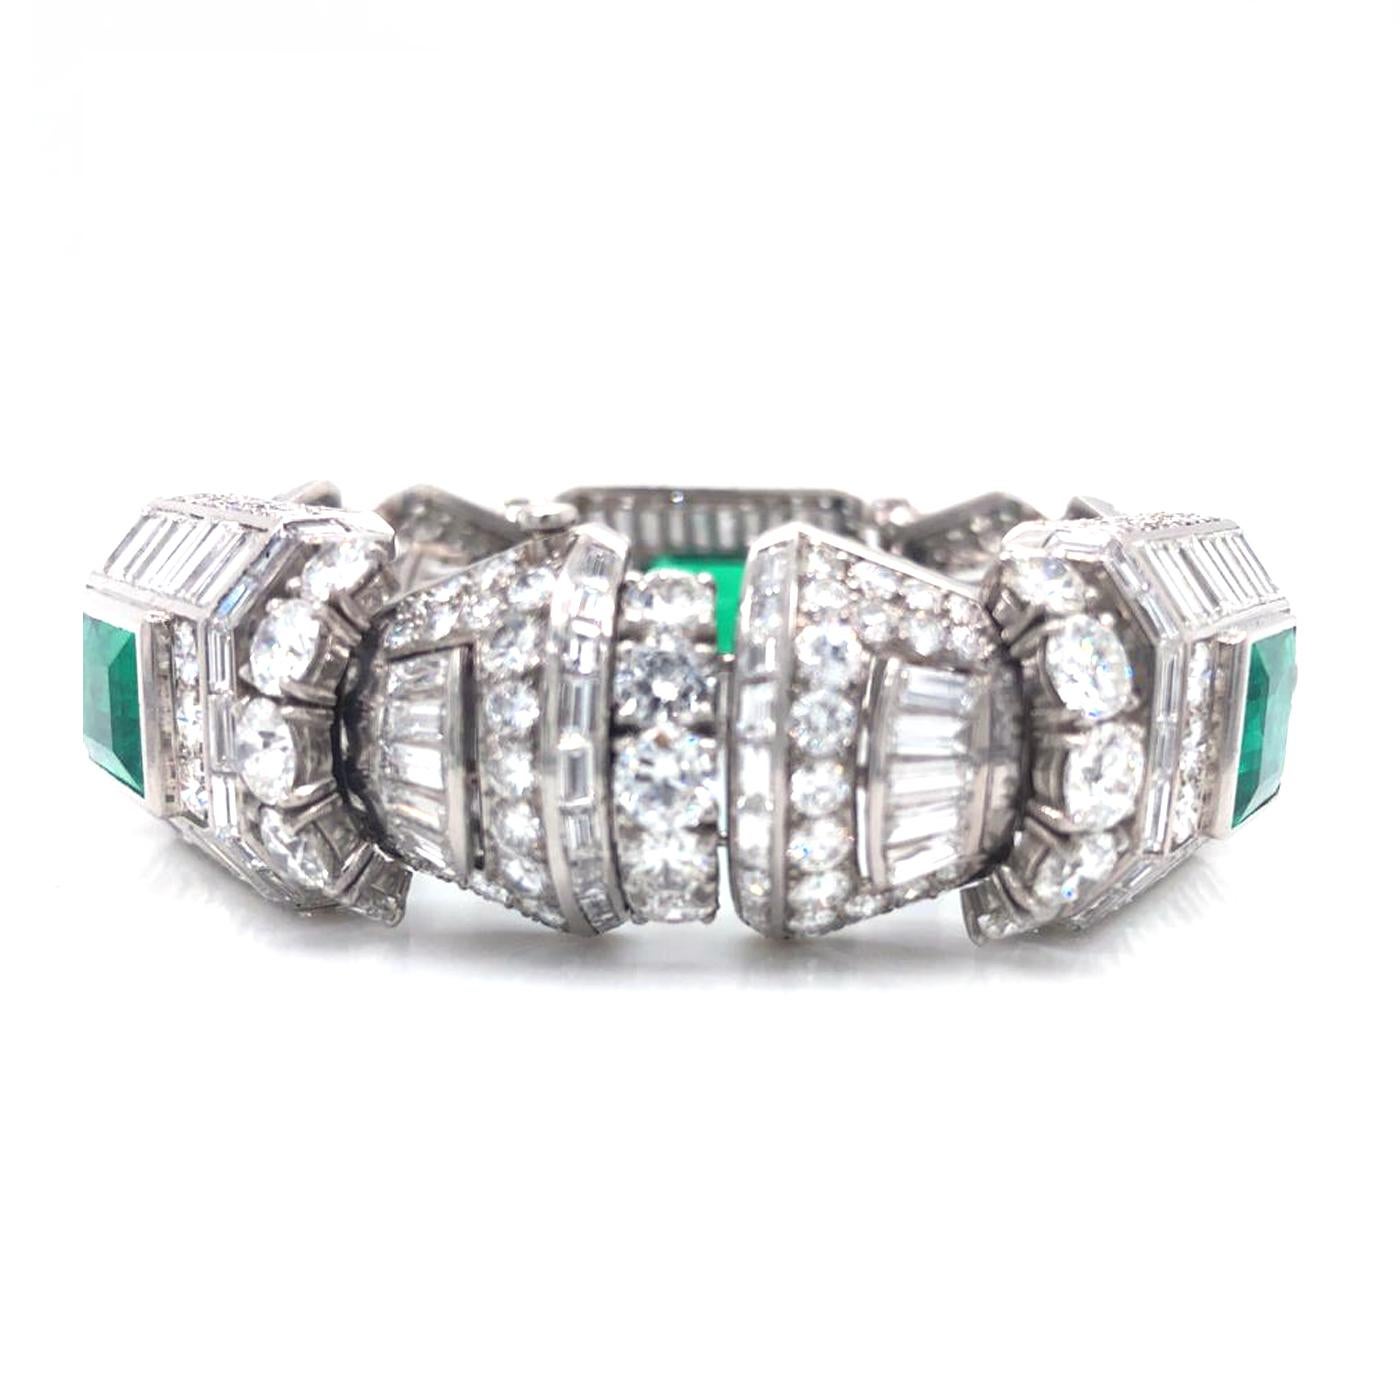 Emerald Cut Diamond and 12ct Colombian Emeralds French Platinum Deco Bracelet Rubell Frers For Sale